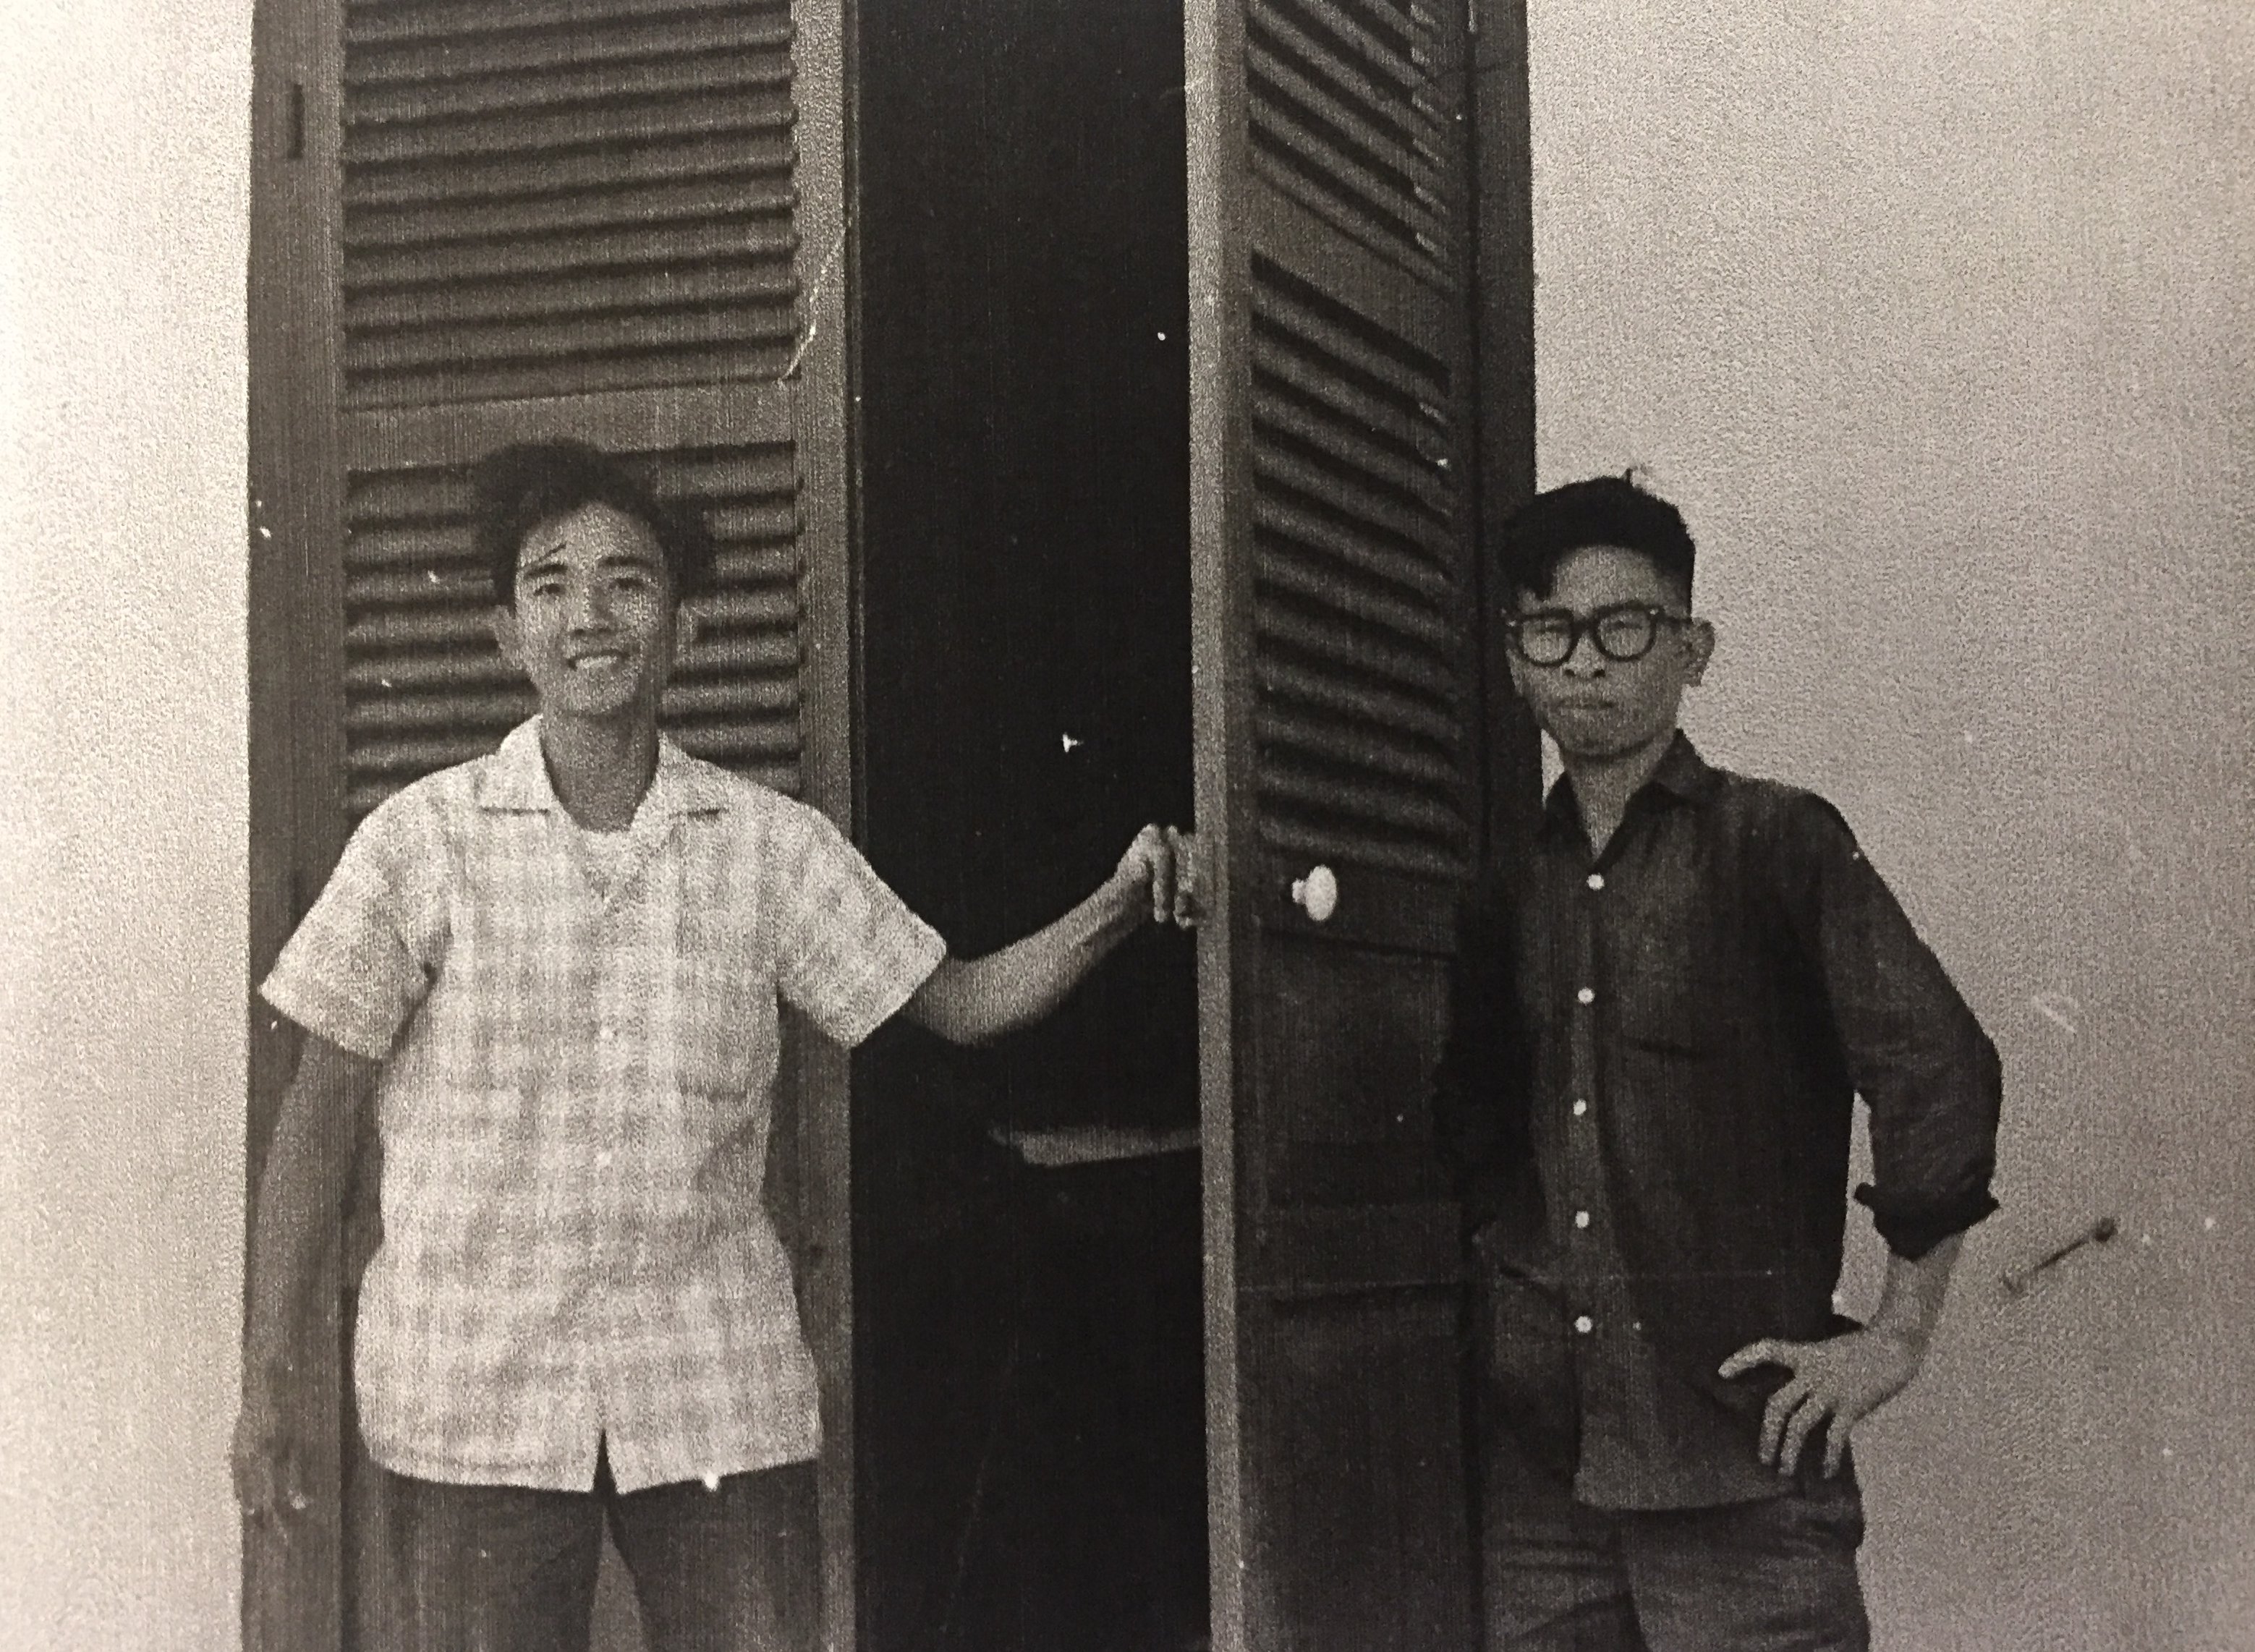 Two young Asian men standing outside a building with shutter doors. One wears a light colored plaid shirt, the other is in black.